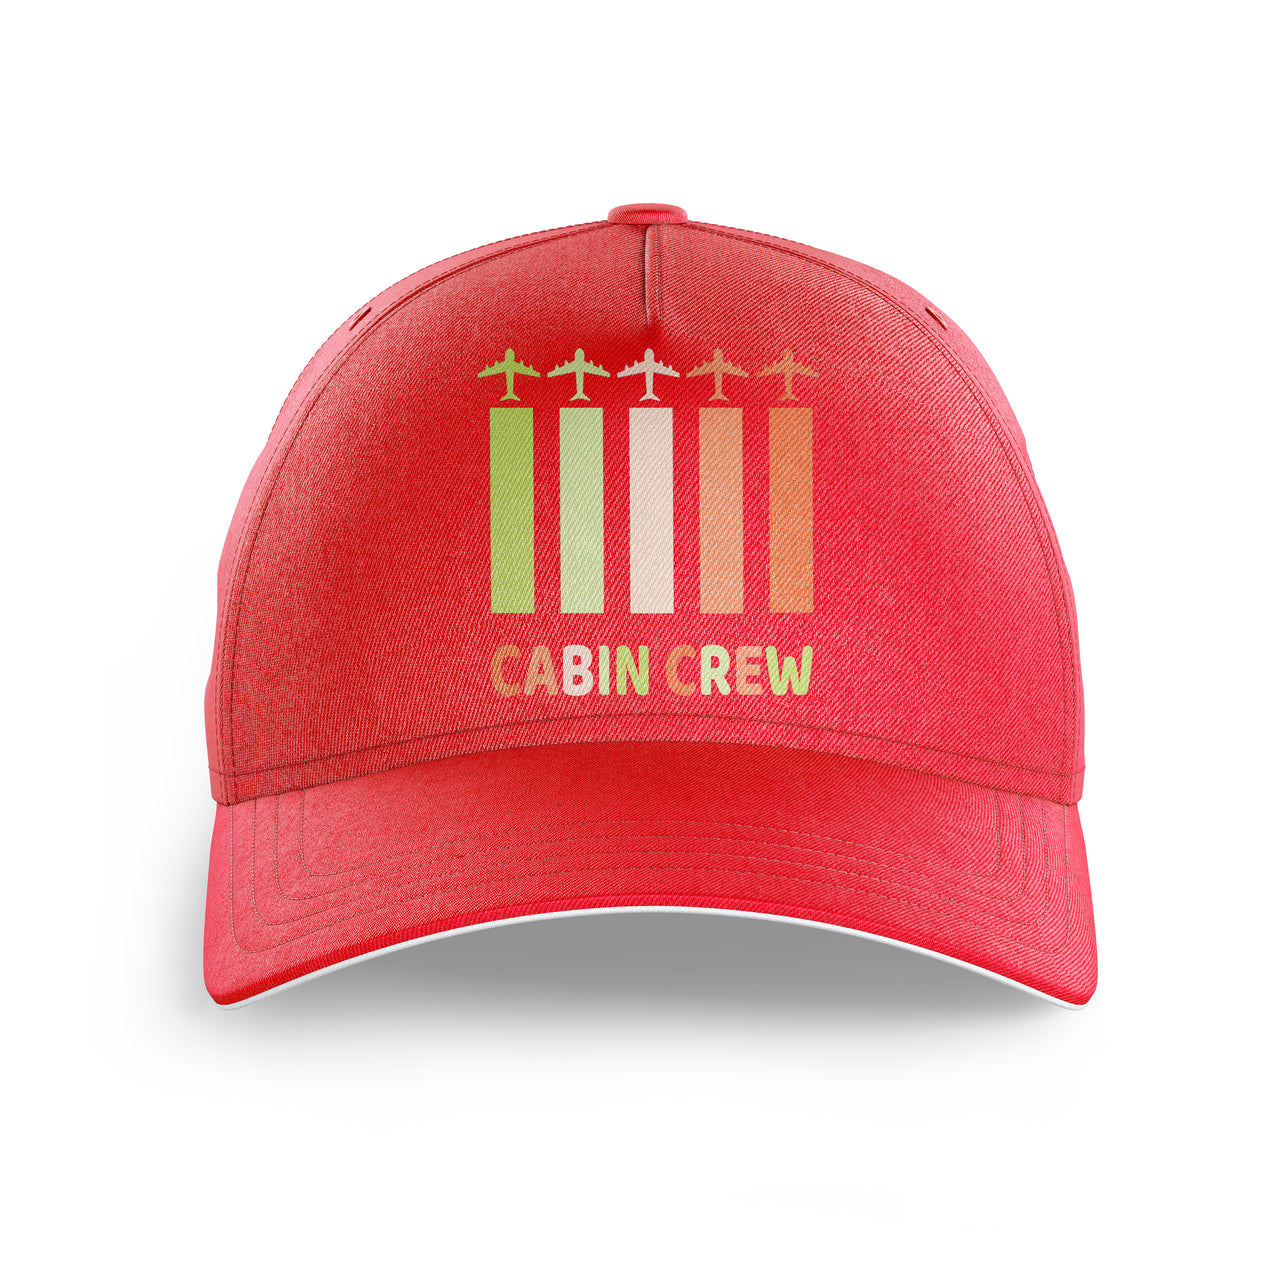 Colourful Cabin Crew Printed Hats